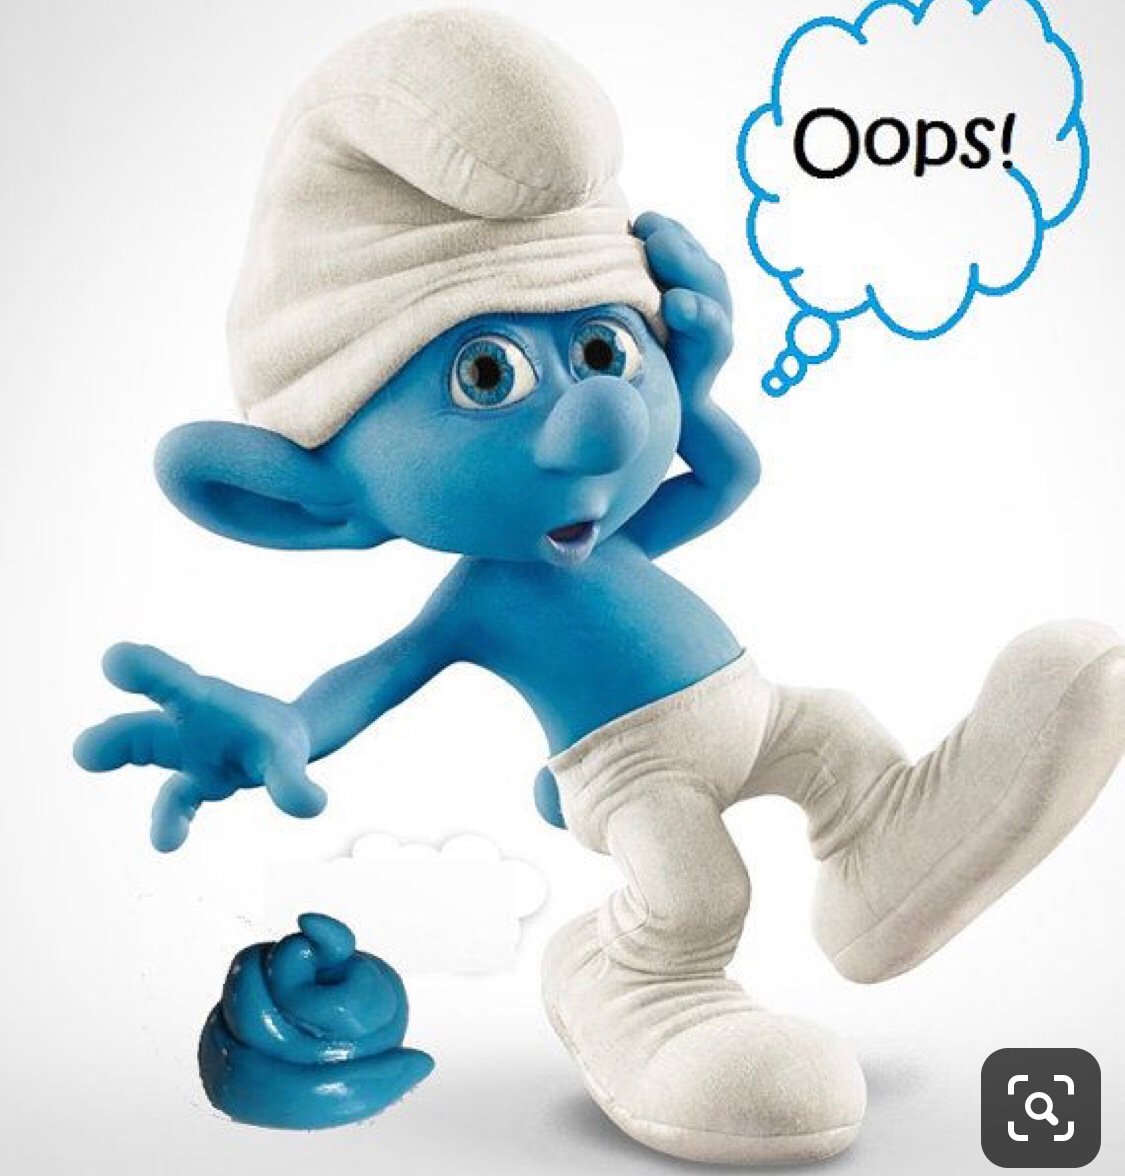 Maybe there’s a smurf Village tributary. 